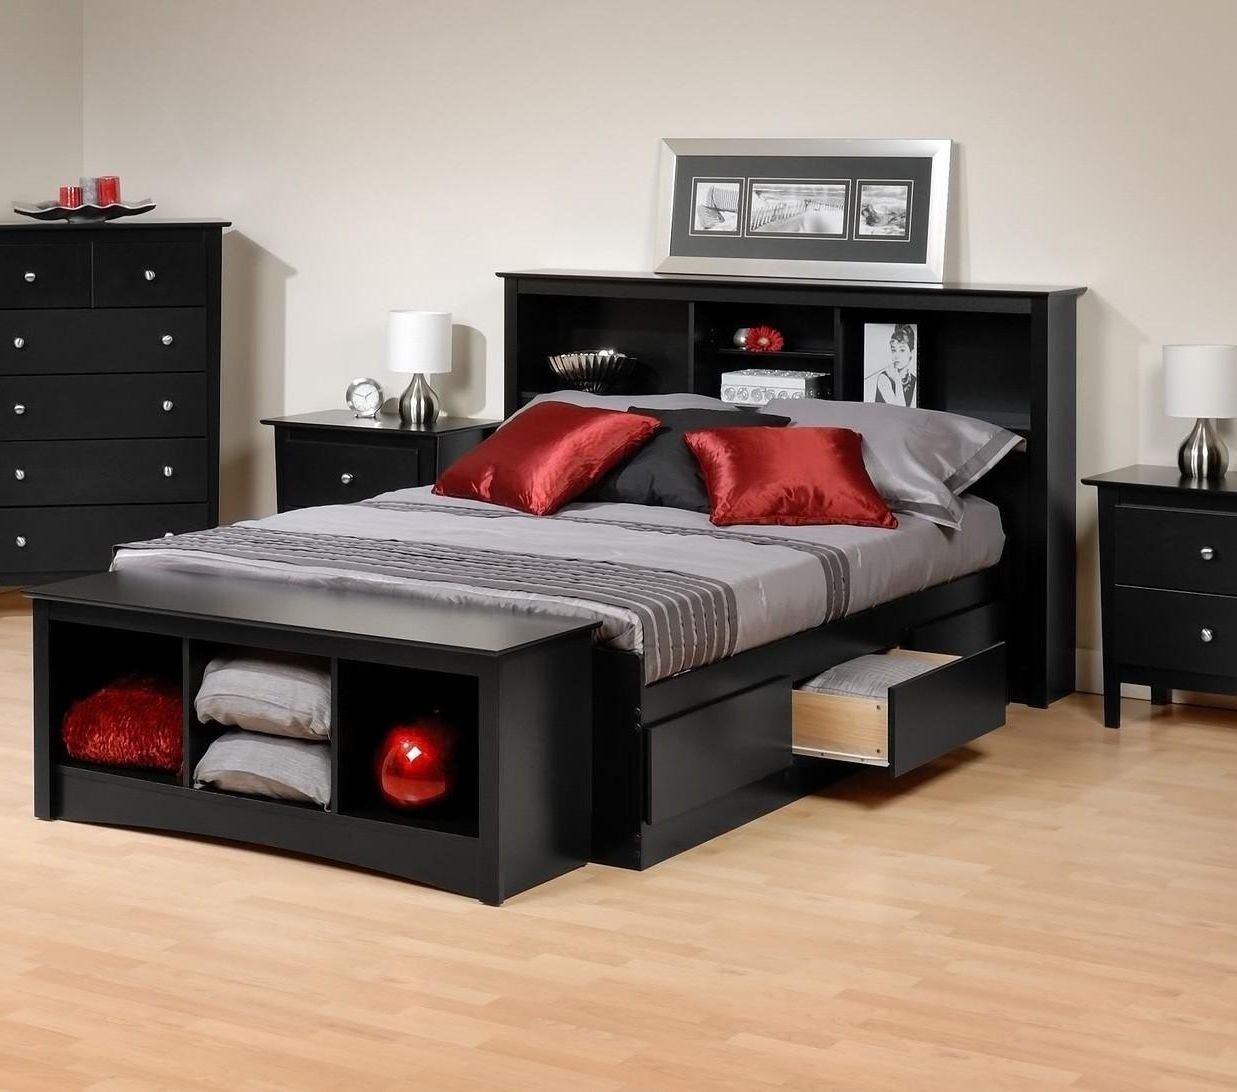 Famous Platform Storage Bed W/ Bookcase Headboard Bed Size:full,color Regarding Storage Bed With Bookcases Headboard (View 10 of 15)